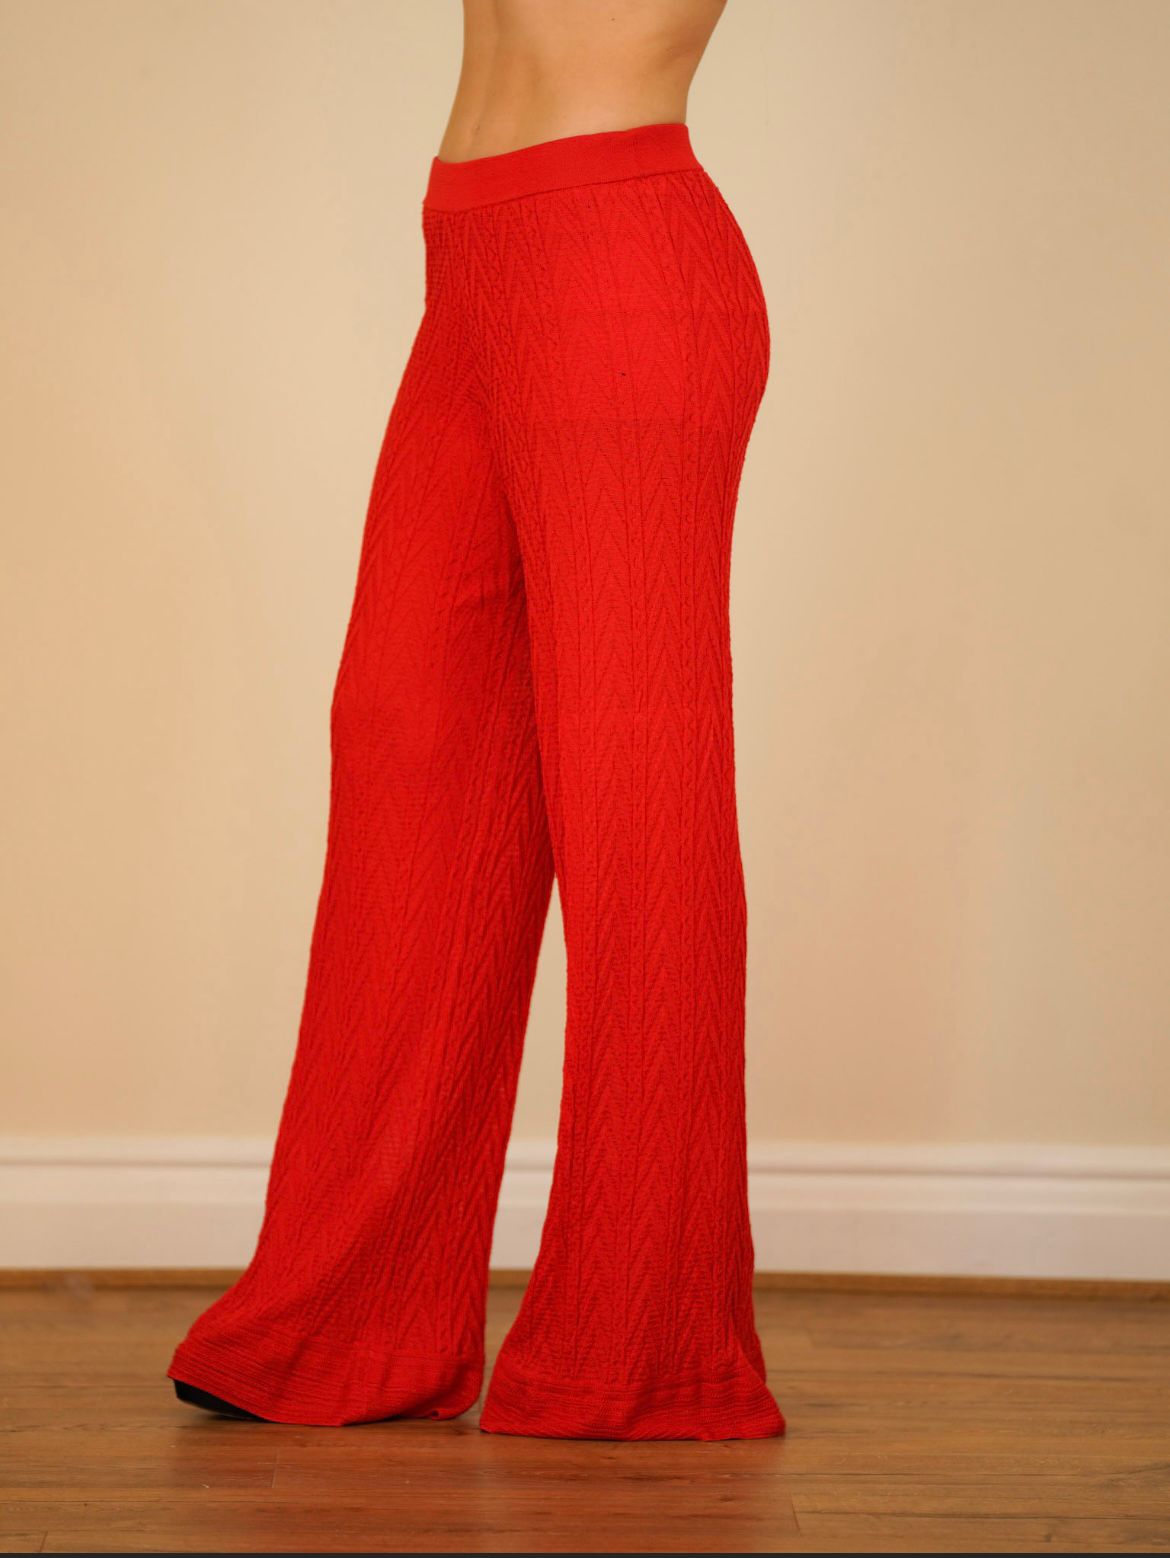 Missoni red knit trousers size 38